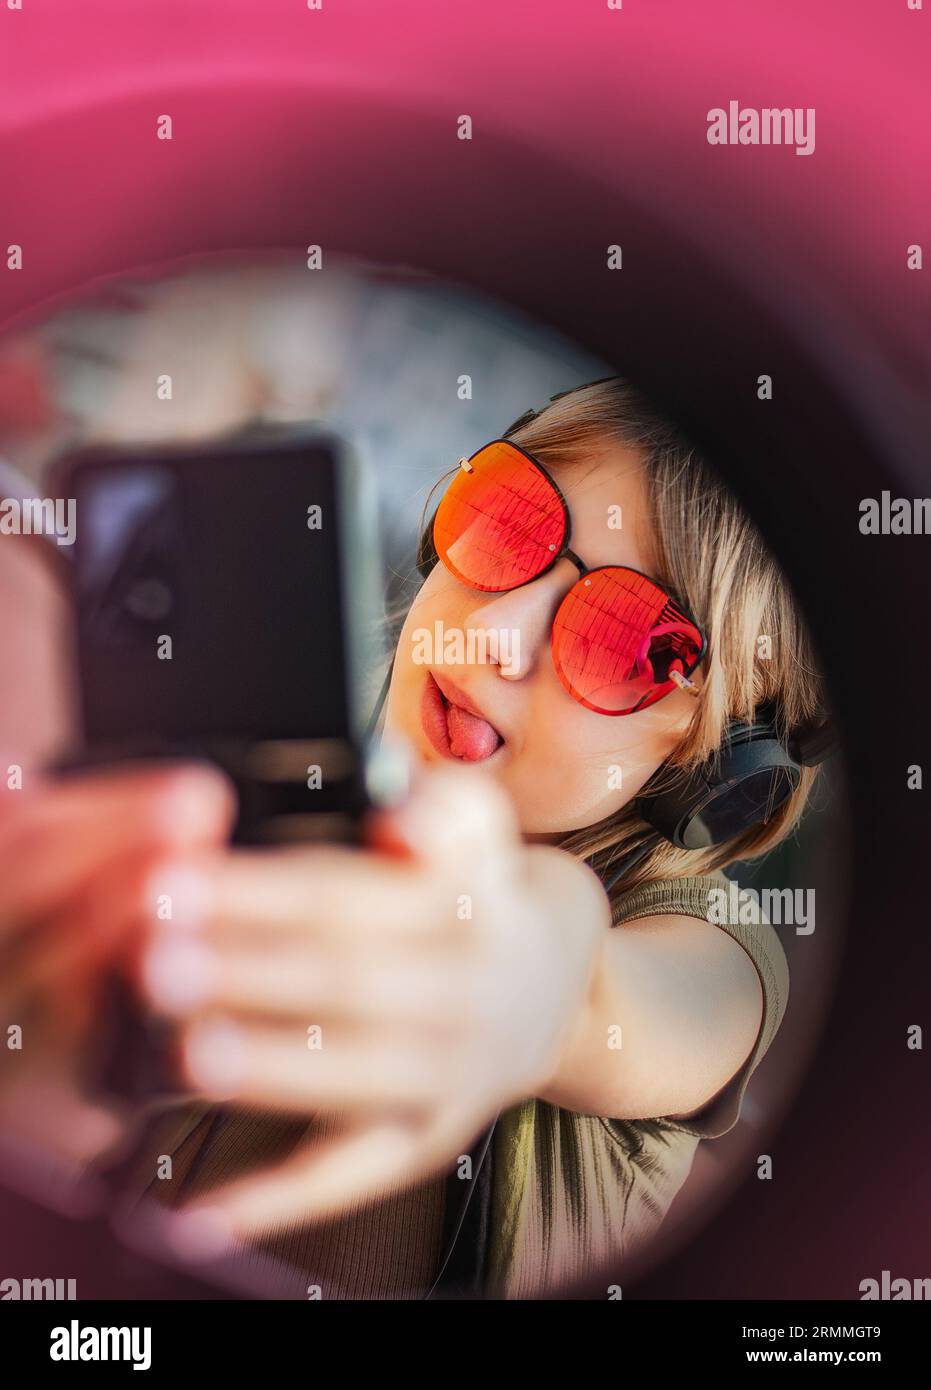 Teenage girl social media blogger recording video speaking looking at smartphone on tripod with ring light, on the balcony of the building. Stock Photo